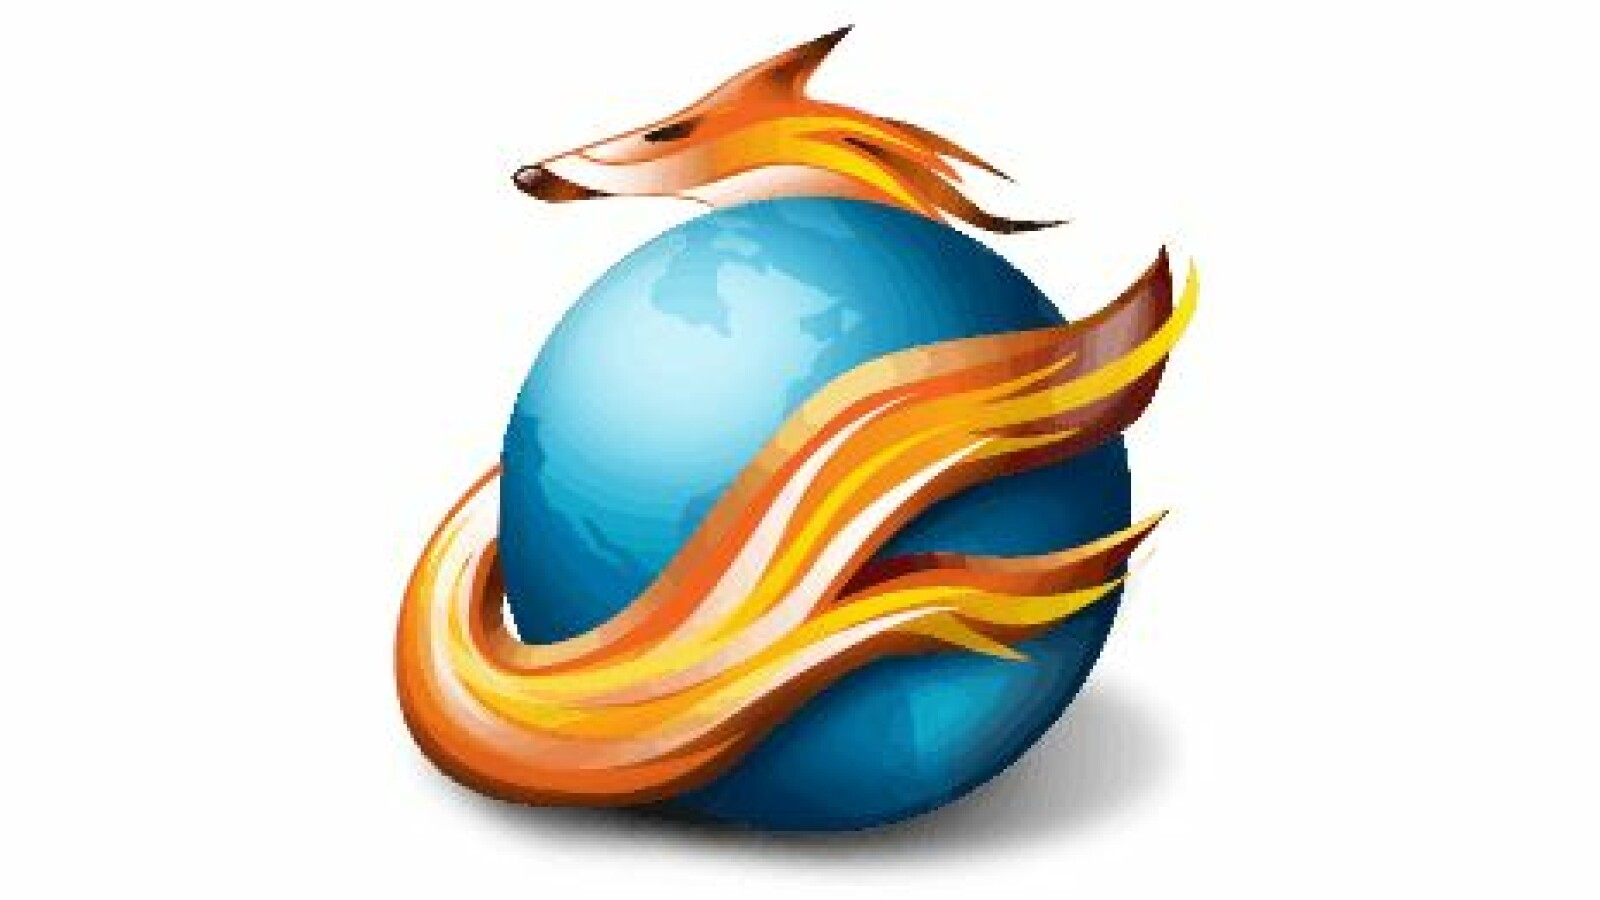 Firemin 9.8.3.8095 for apple instal free